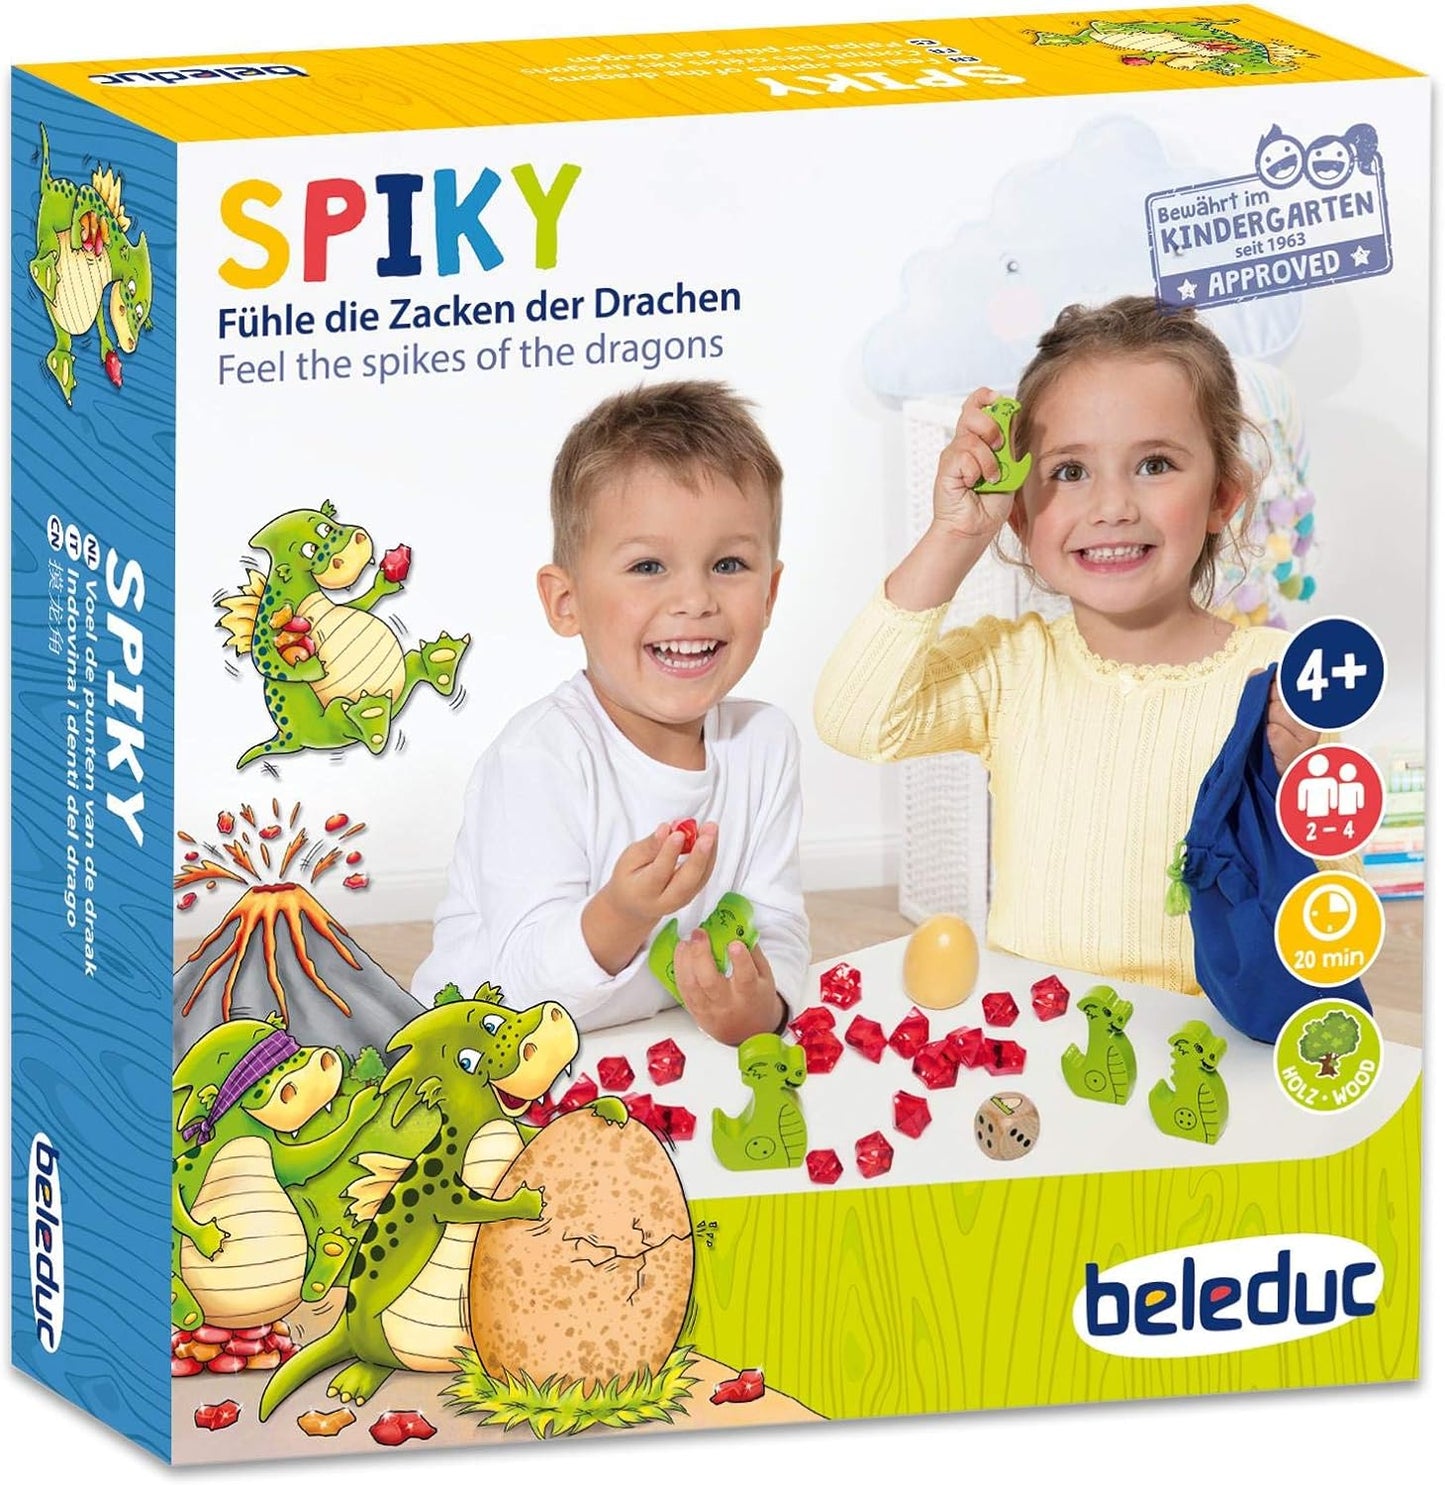 Beleduc Spiky Touch and Feel Matching Game 恐龍角觸摸配對遊戲